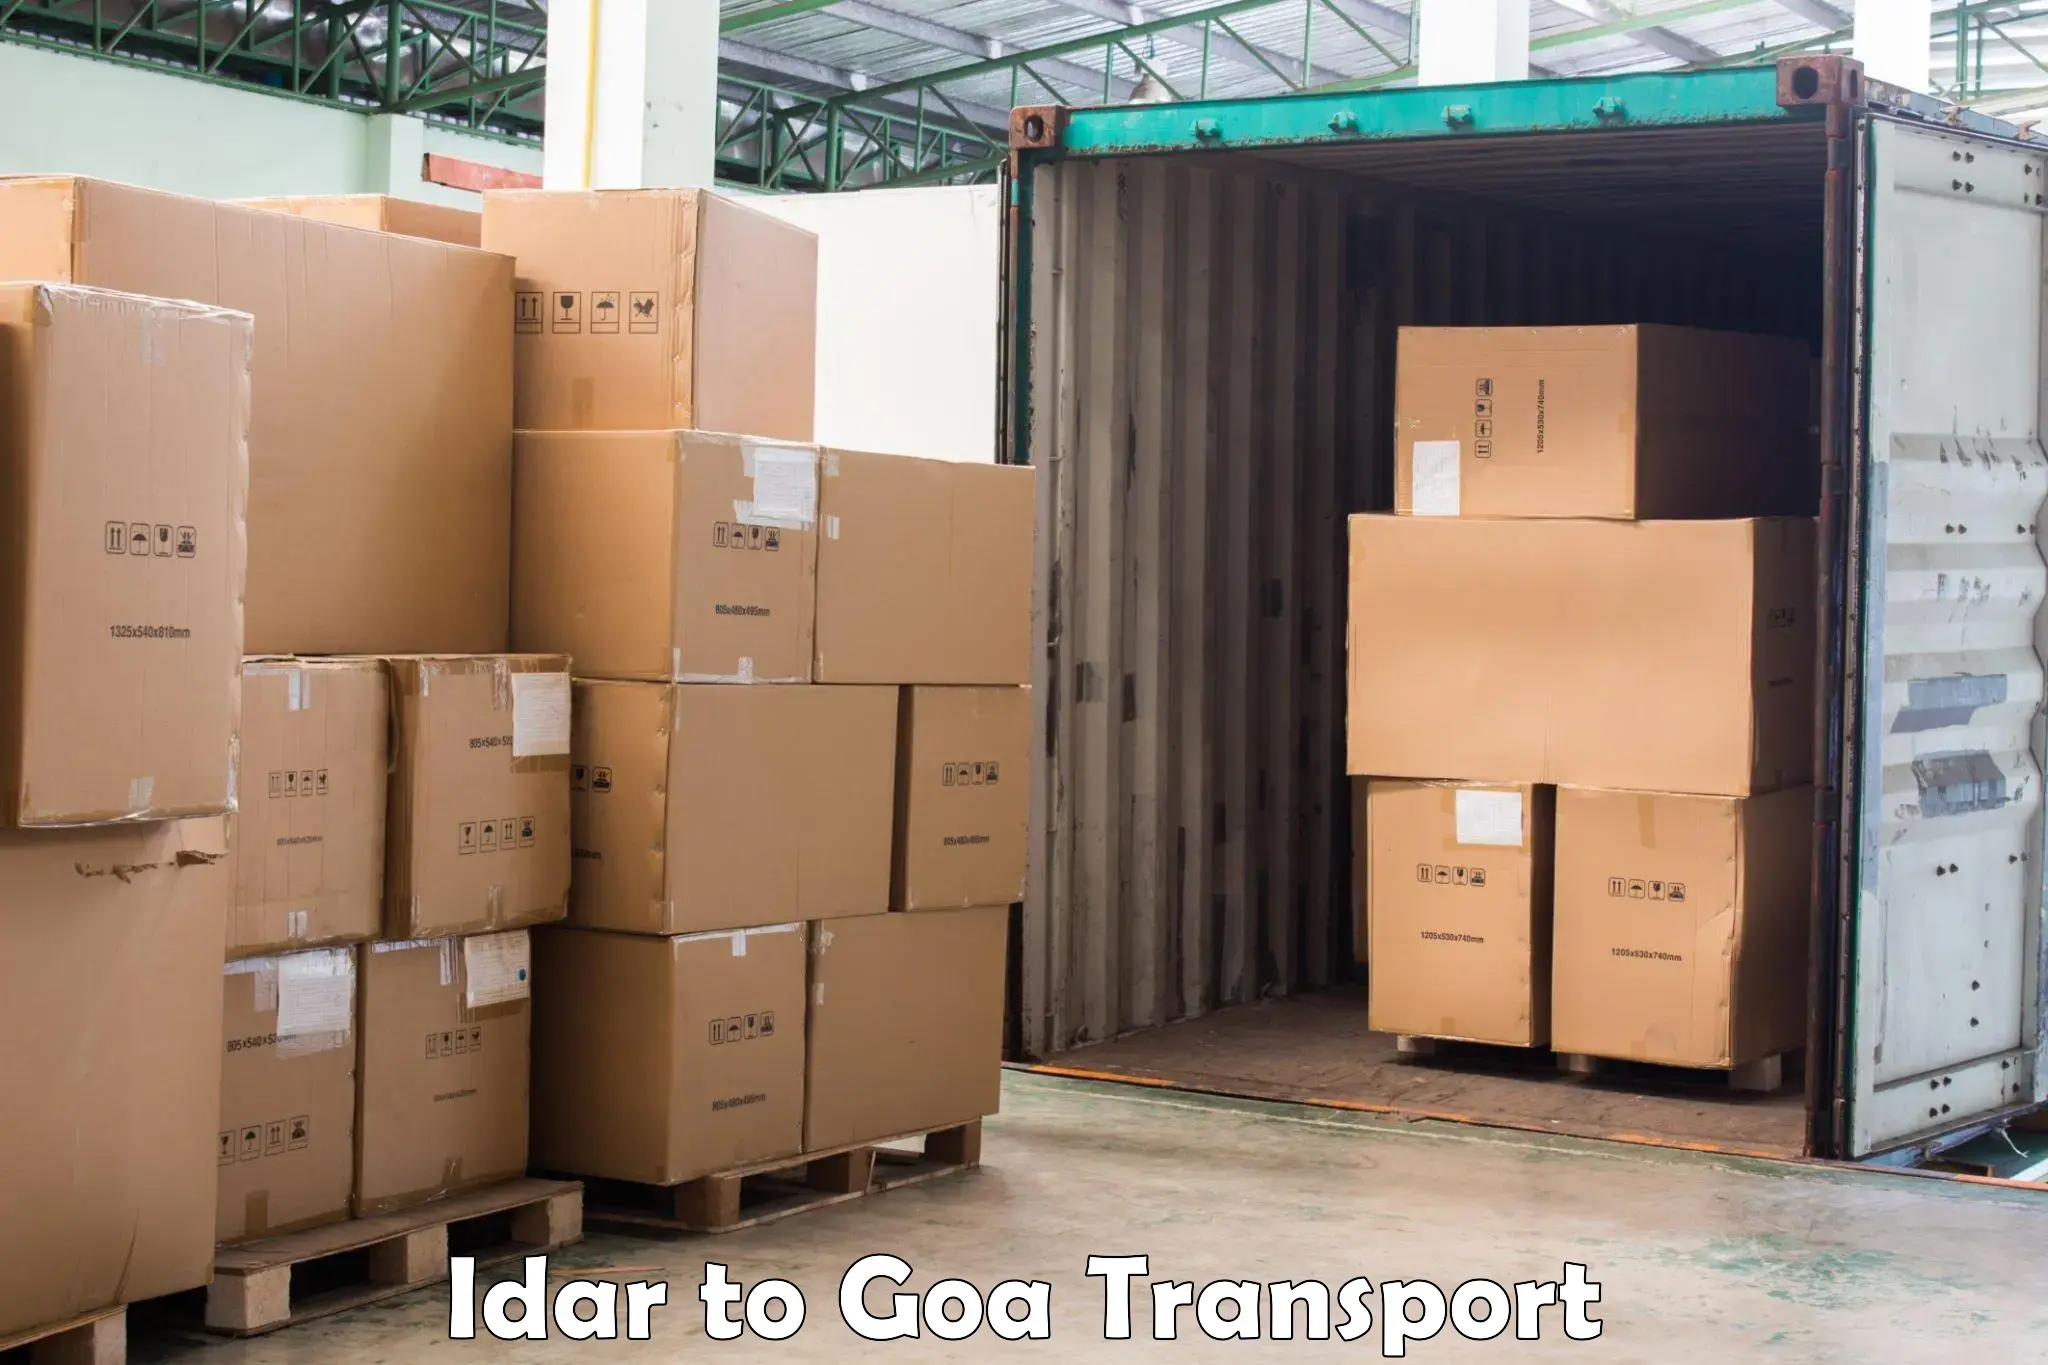 Delivery service Idar to Goa